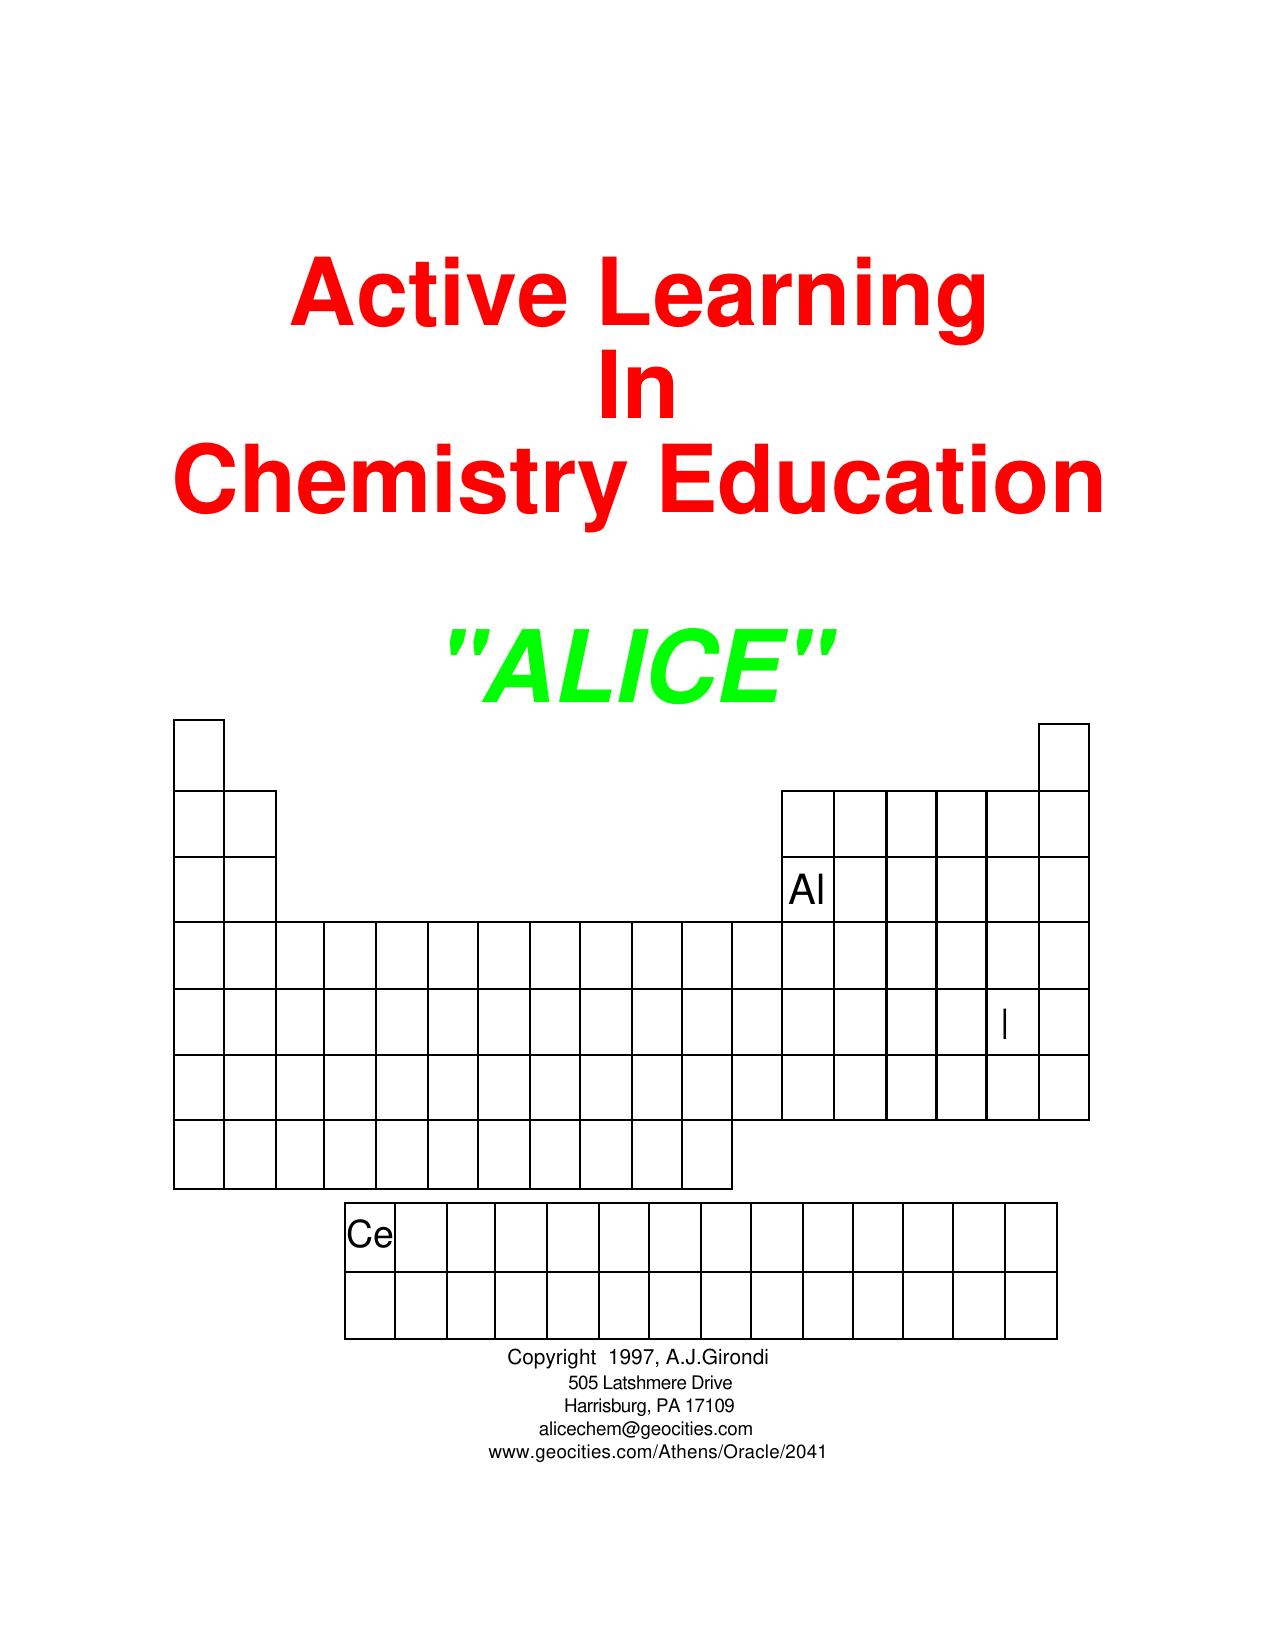 Active Learning In Chemistry Education